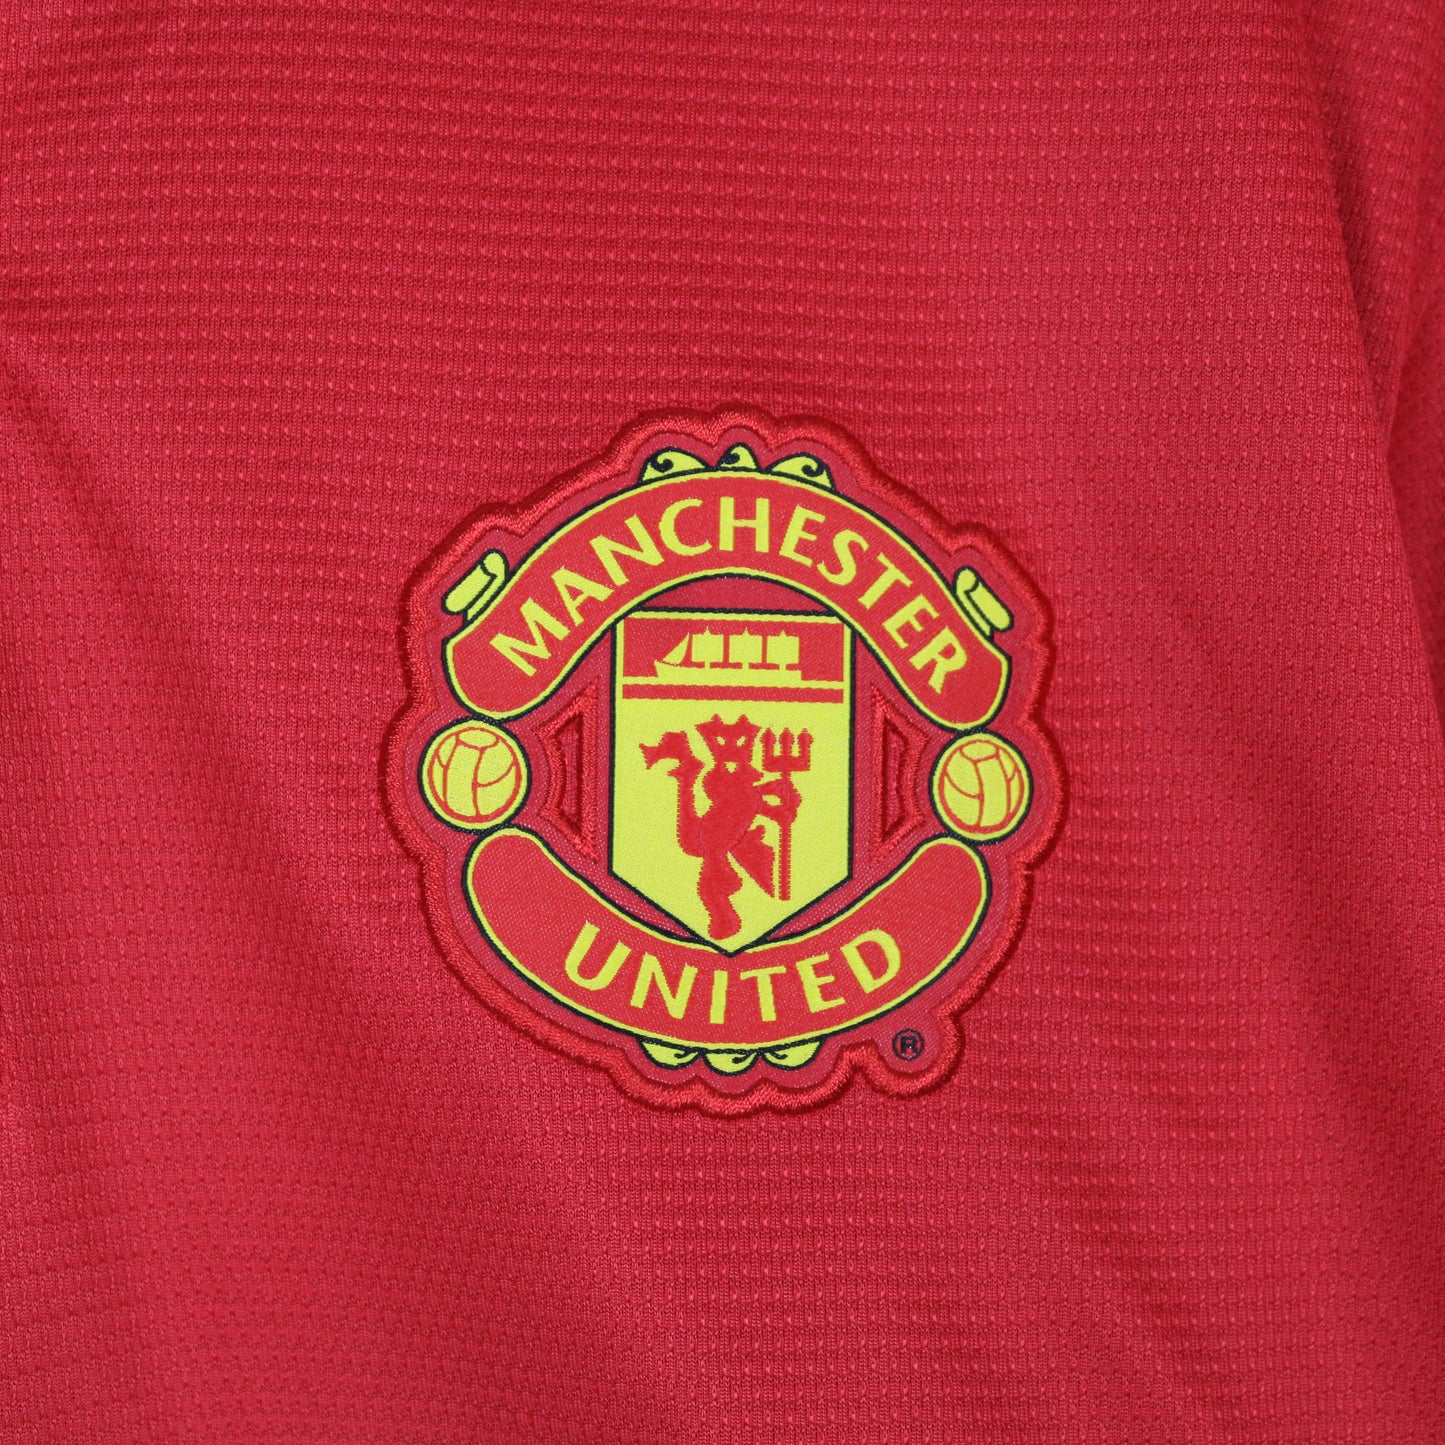 Manchester United 2013/14 Home Nike Jersey - XL